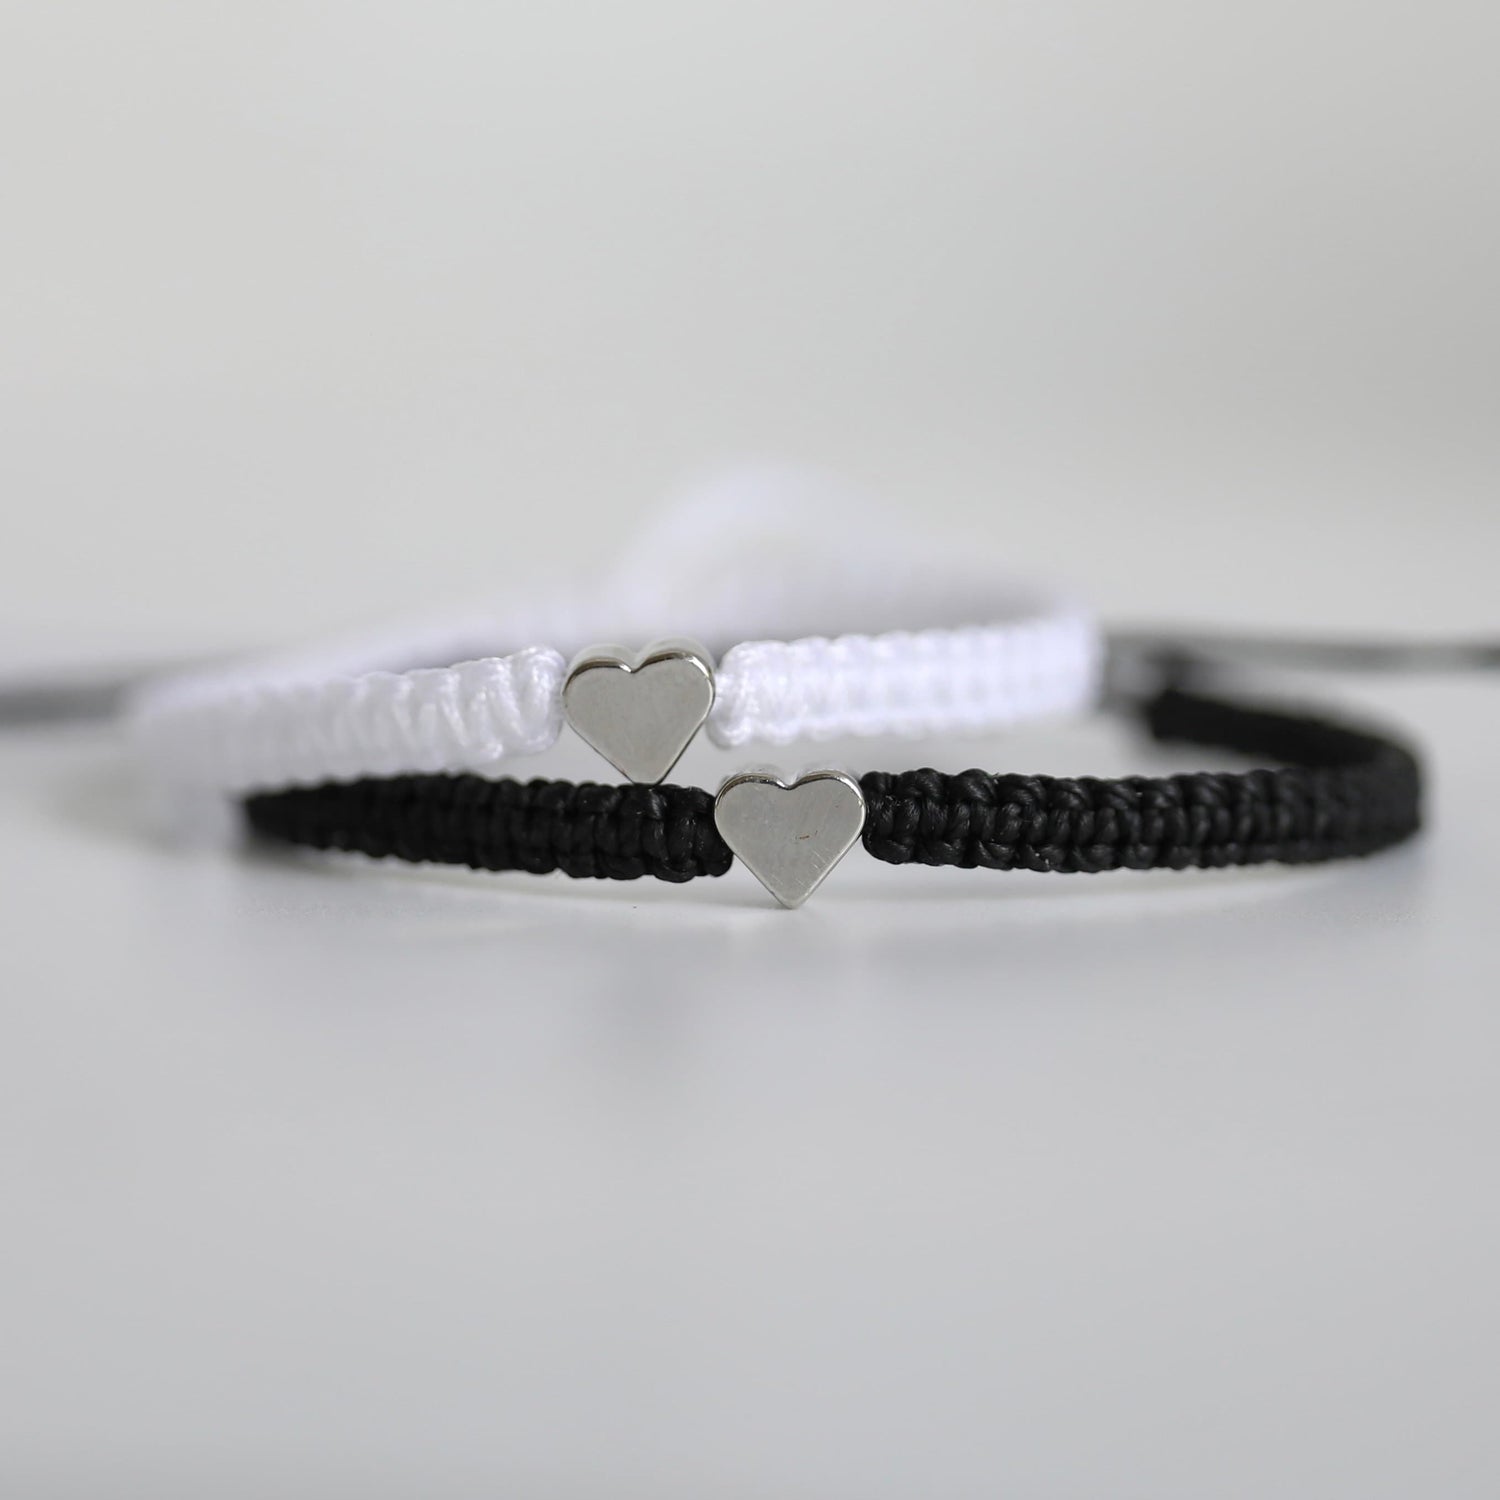 Couples Bracelets, Silver Heart Black and White Macrame Bracelets, His and Hers